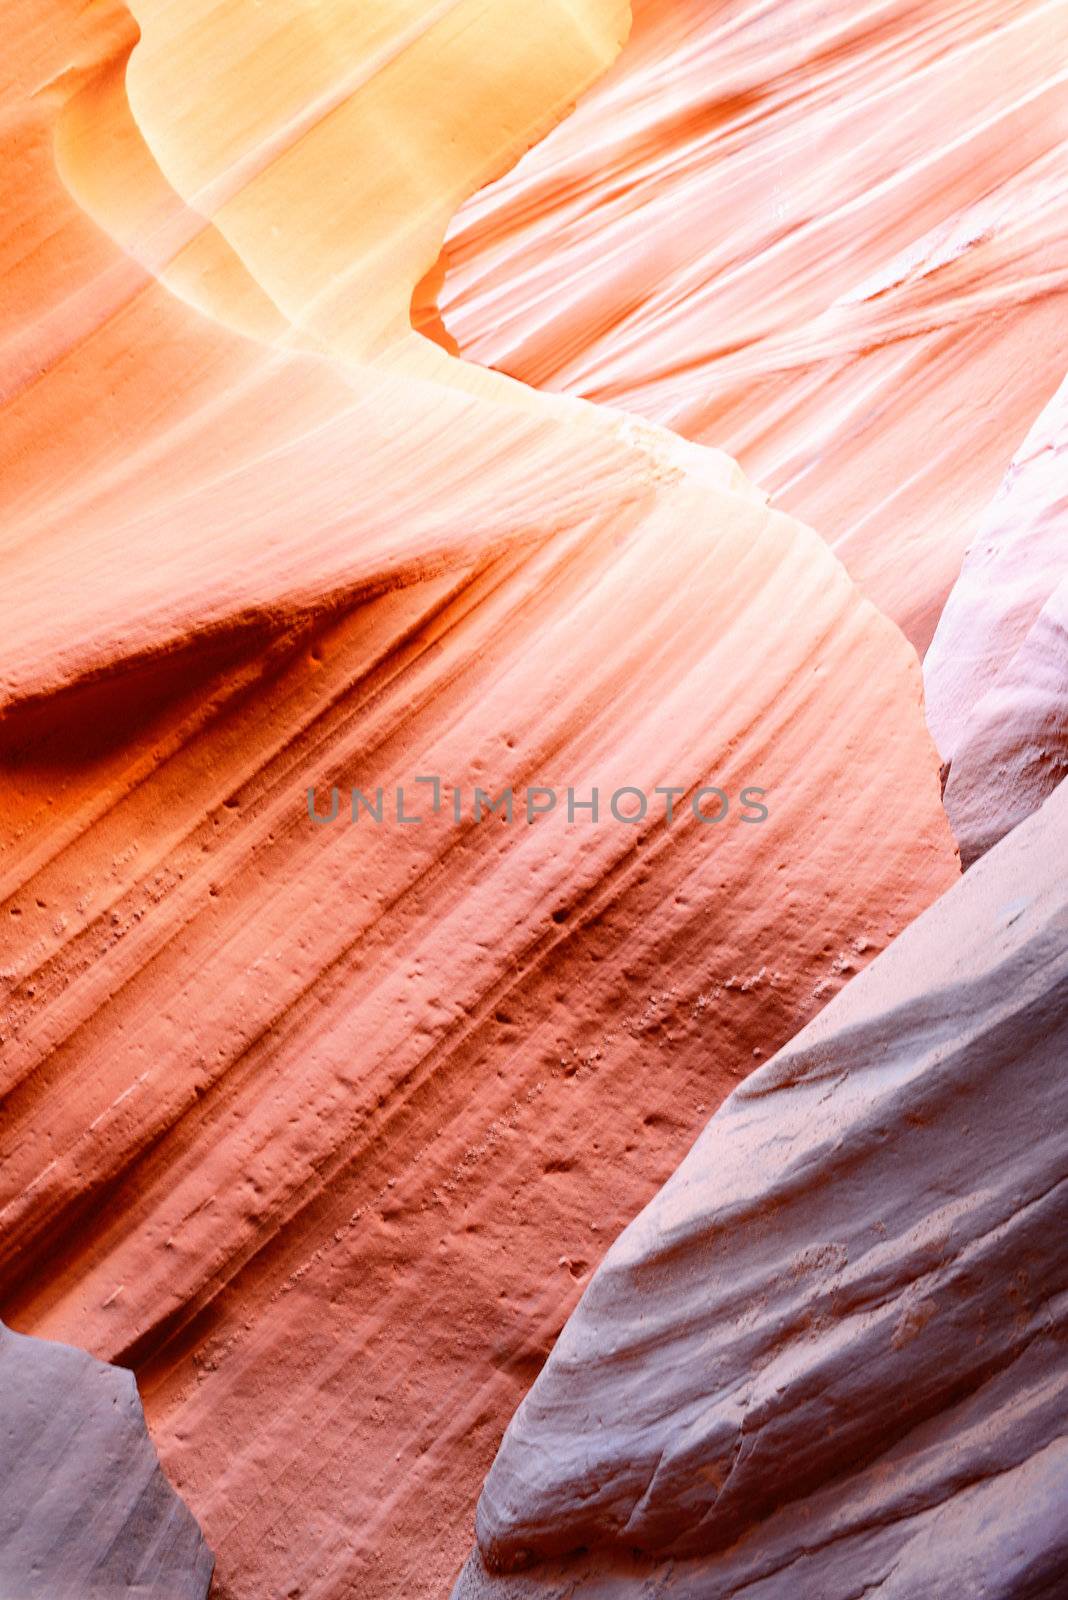 The Upper Antelope Canyon, Page, Arizona, USA. The second edition with the expanded range 